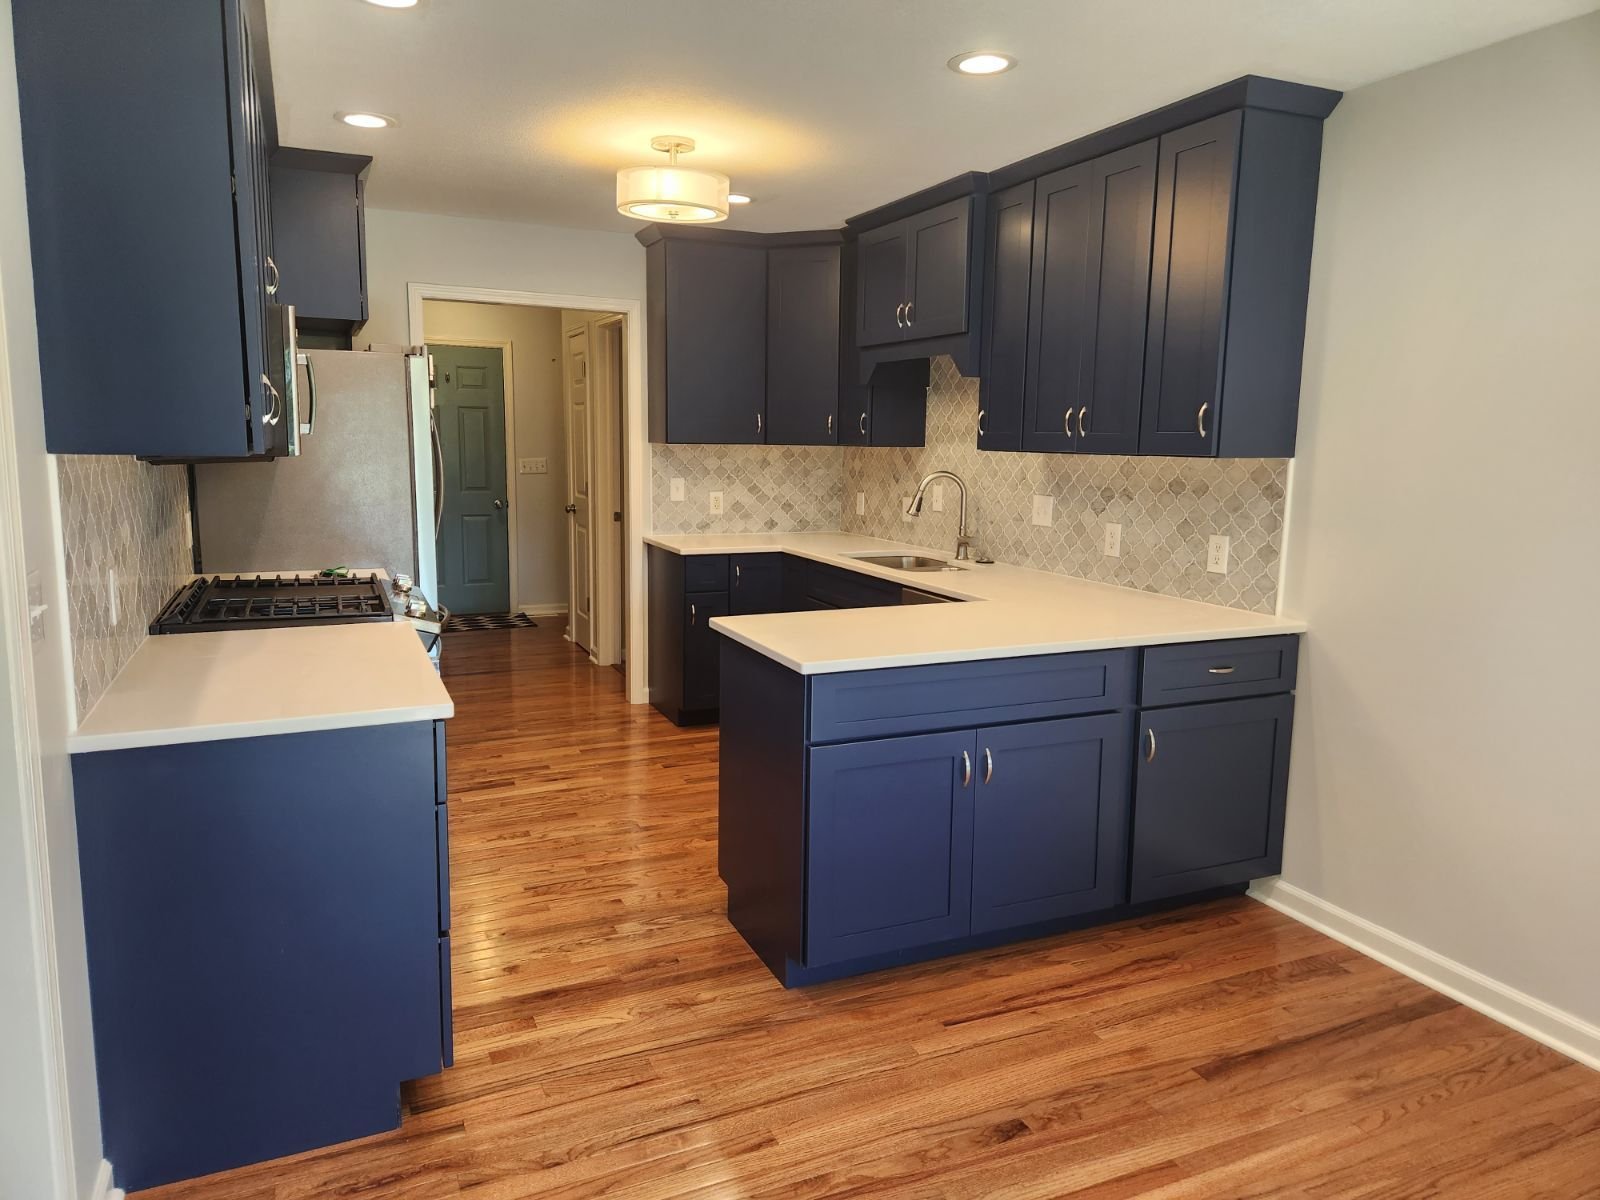 Custom Cabinets in Kitchen Remodel by True Craft Remodelers